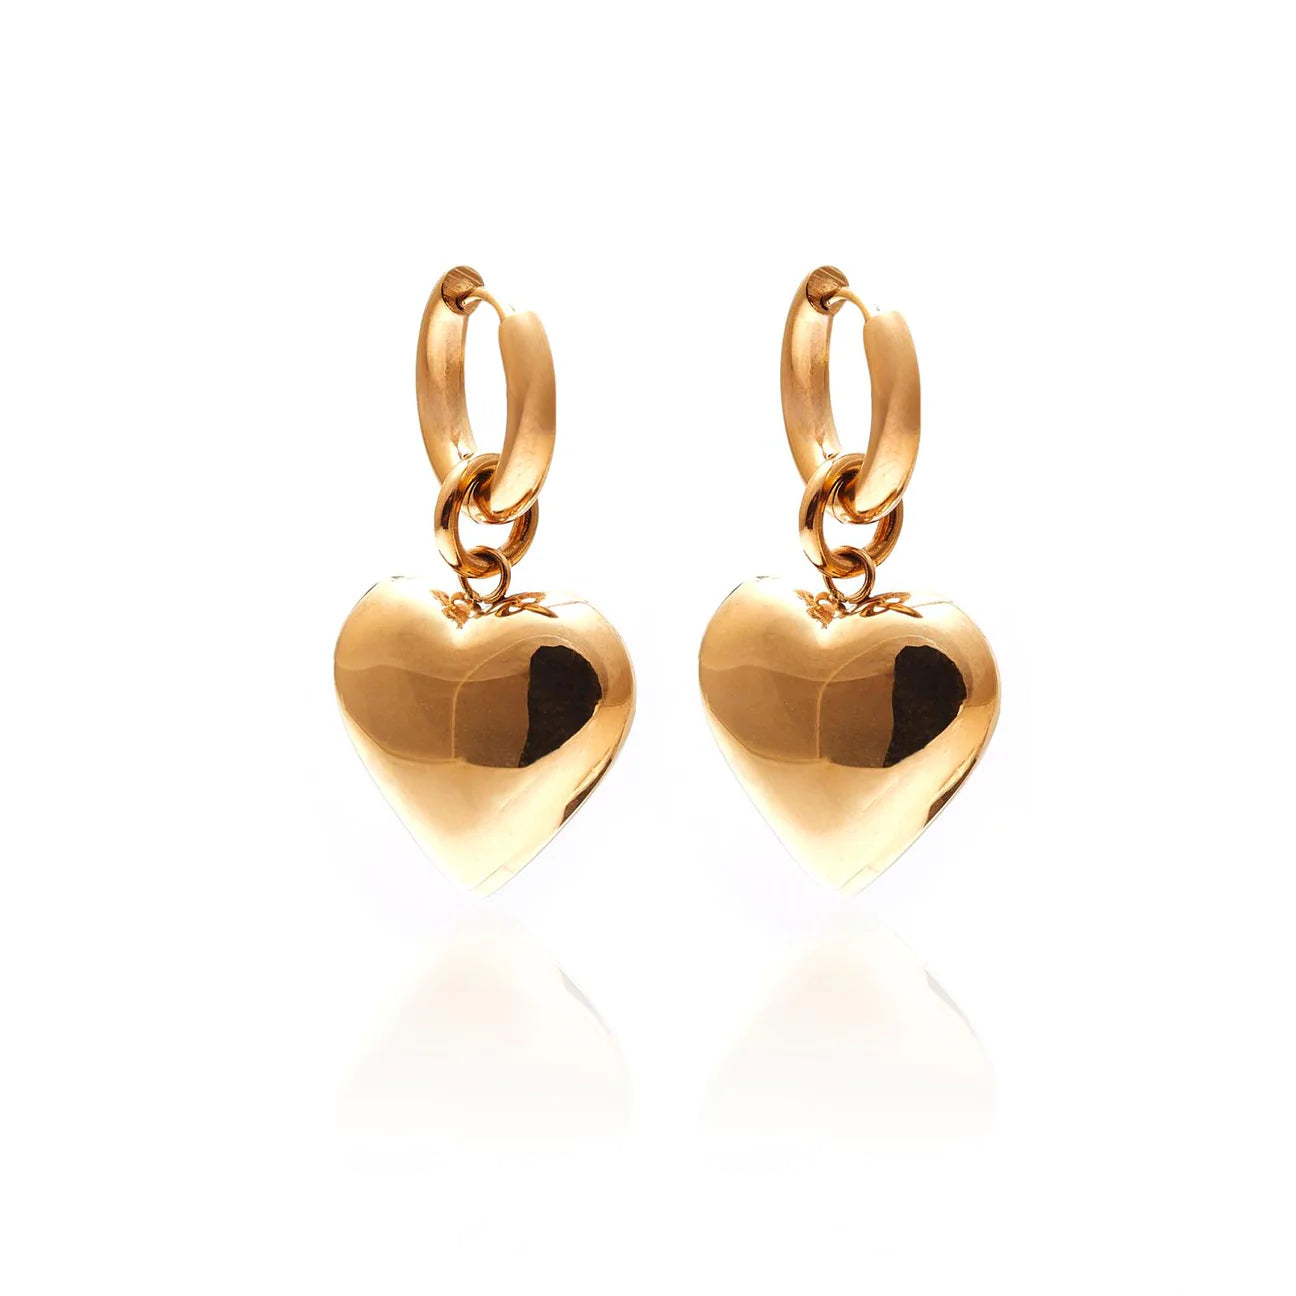 Bisous / Hoops / Stainless steel  Gold plated